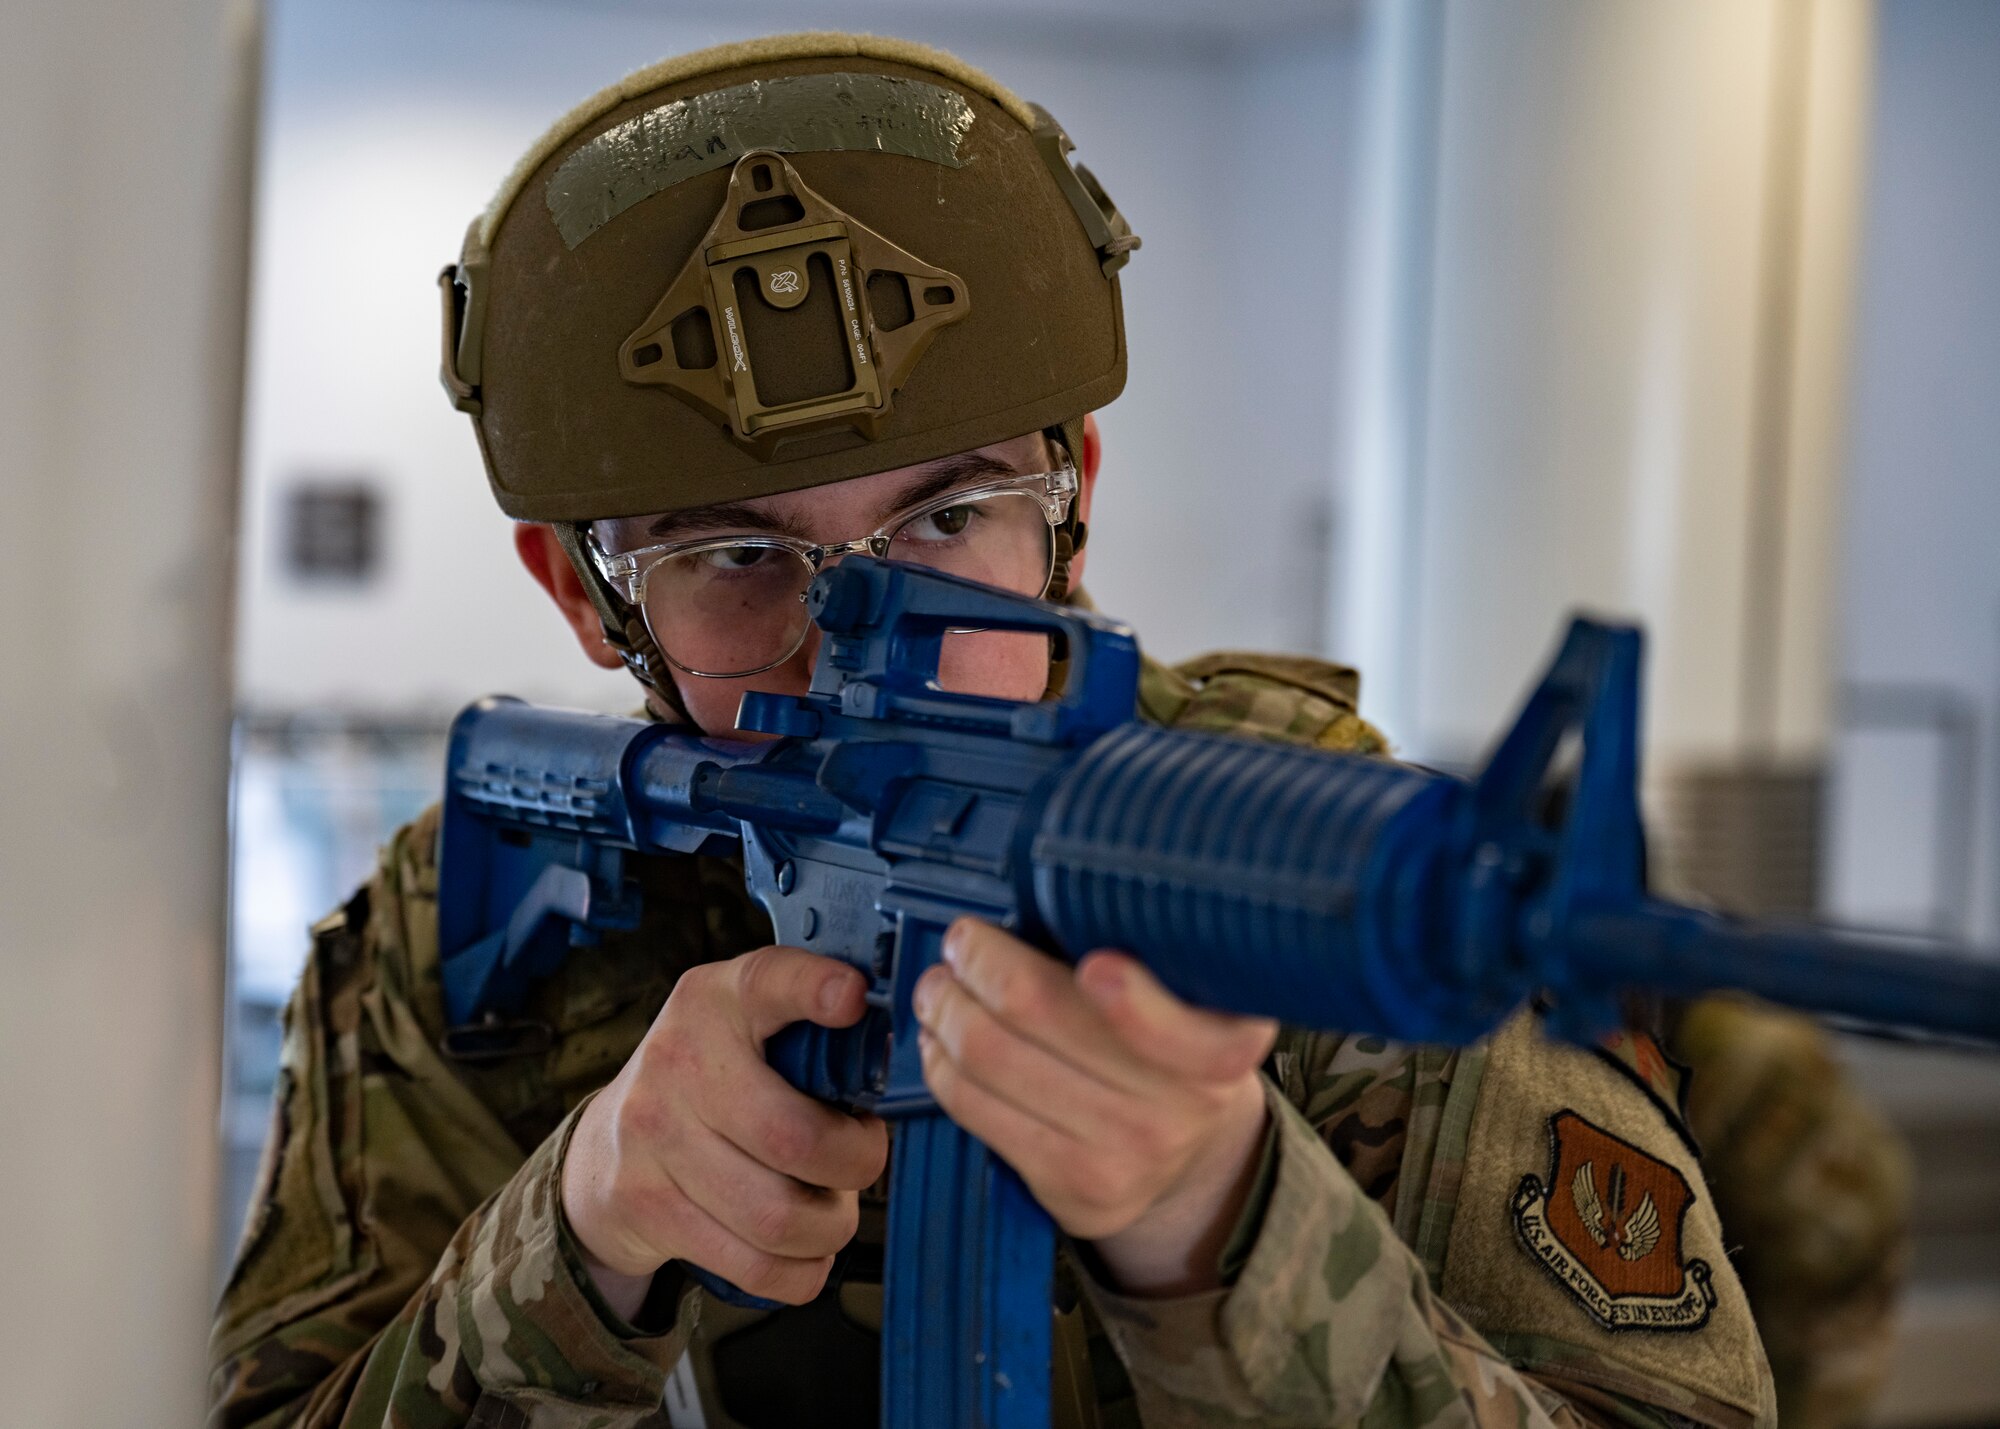 The exercise was designed to evaluate the training, readiness and capability of RAF Mildenhall first responders in order to effectively respond to active shooter threats to the installation.